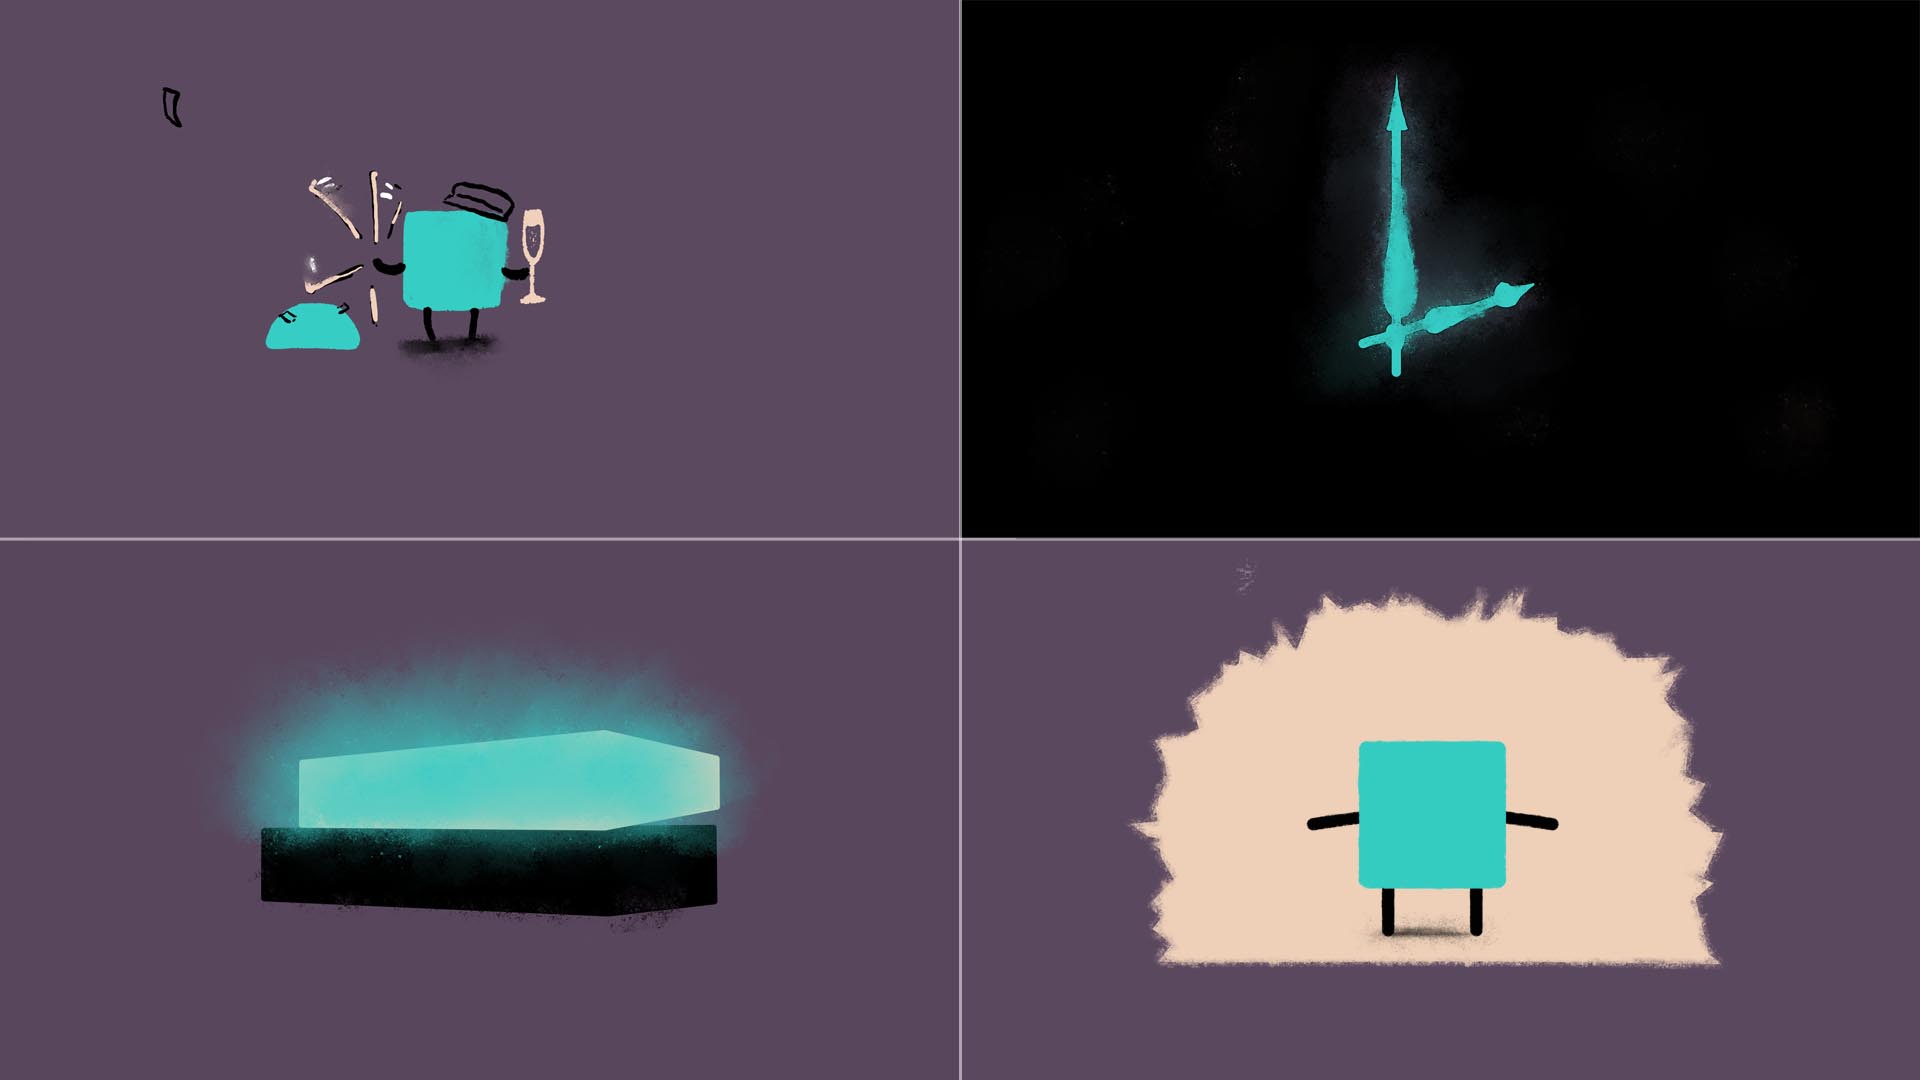 Style frames showing initial design ideas for different animation scenes.